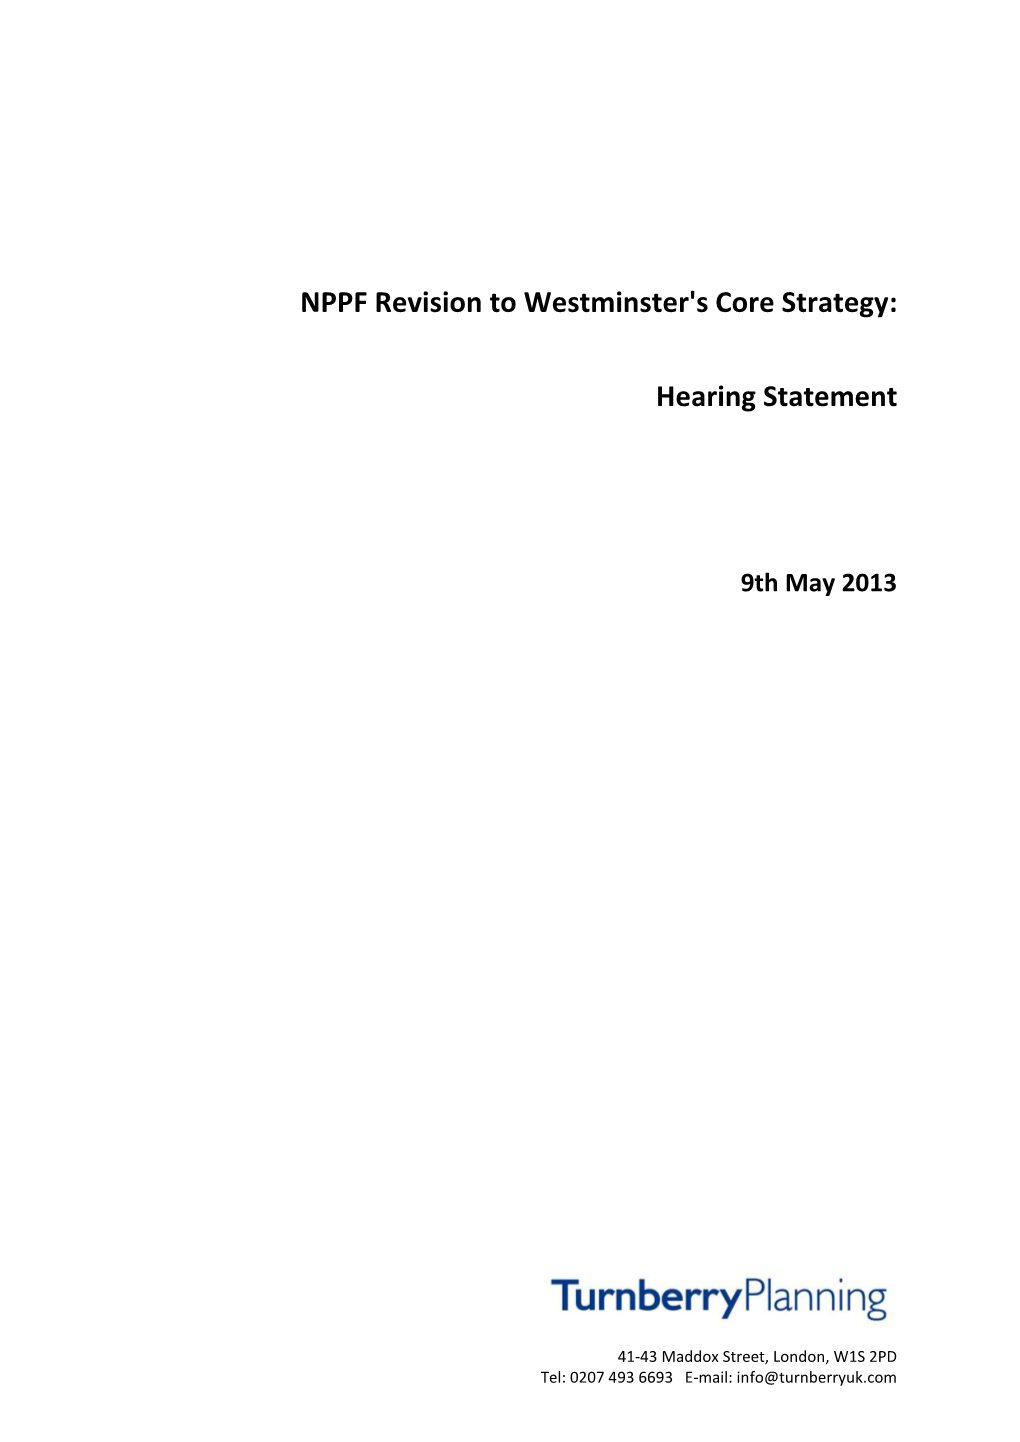 NPPF Revision to Westminster's Core Strategy